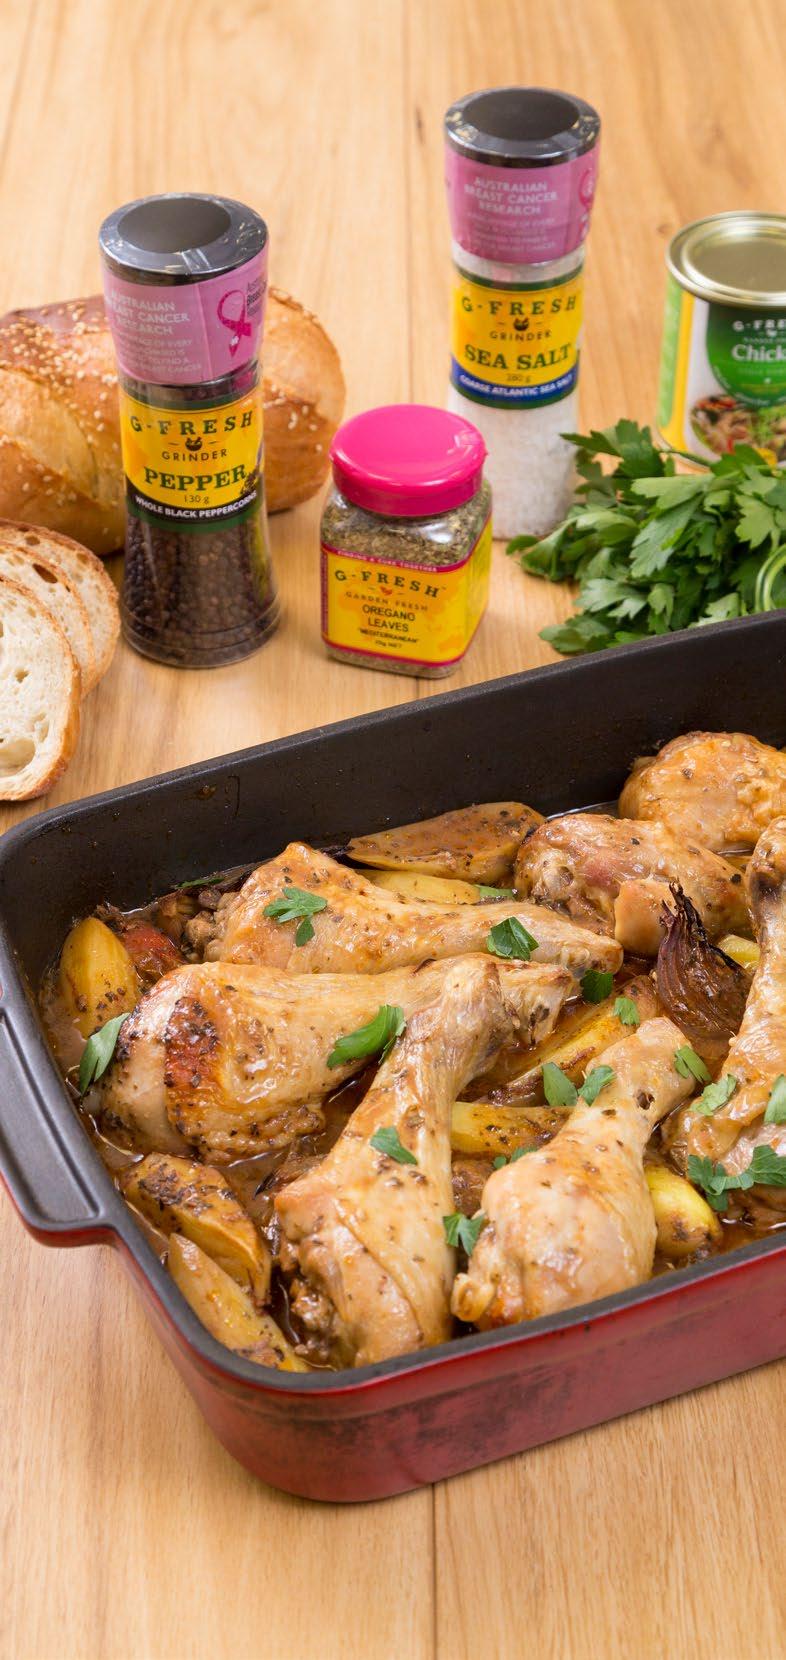 Oregano Chicken and Tomato Tray Bake Author: Bree May, Food According to Bree Serves: 4 8 large chicken drumsticks 1 large red onion 500gms kipfler potatoes or other waxy variety 200gm punnet of